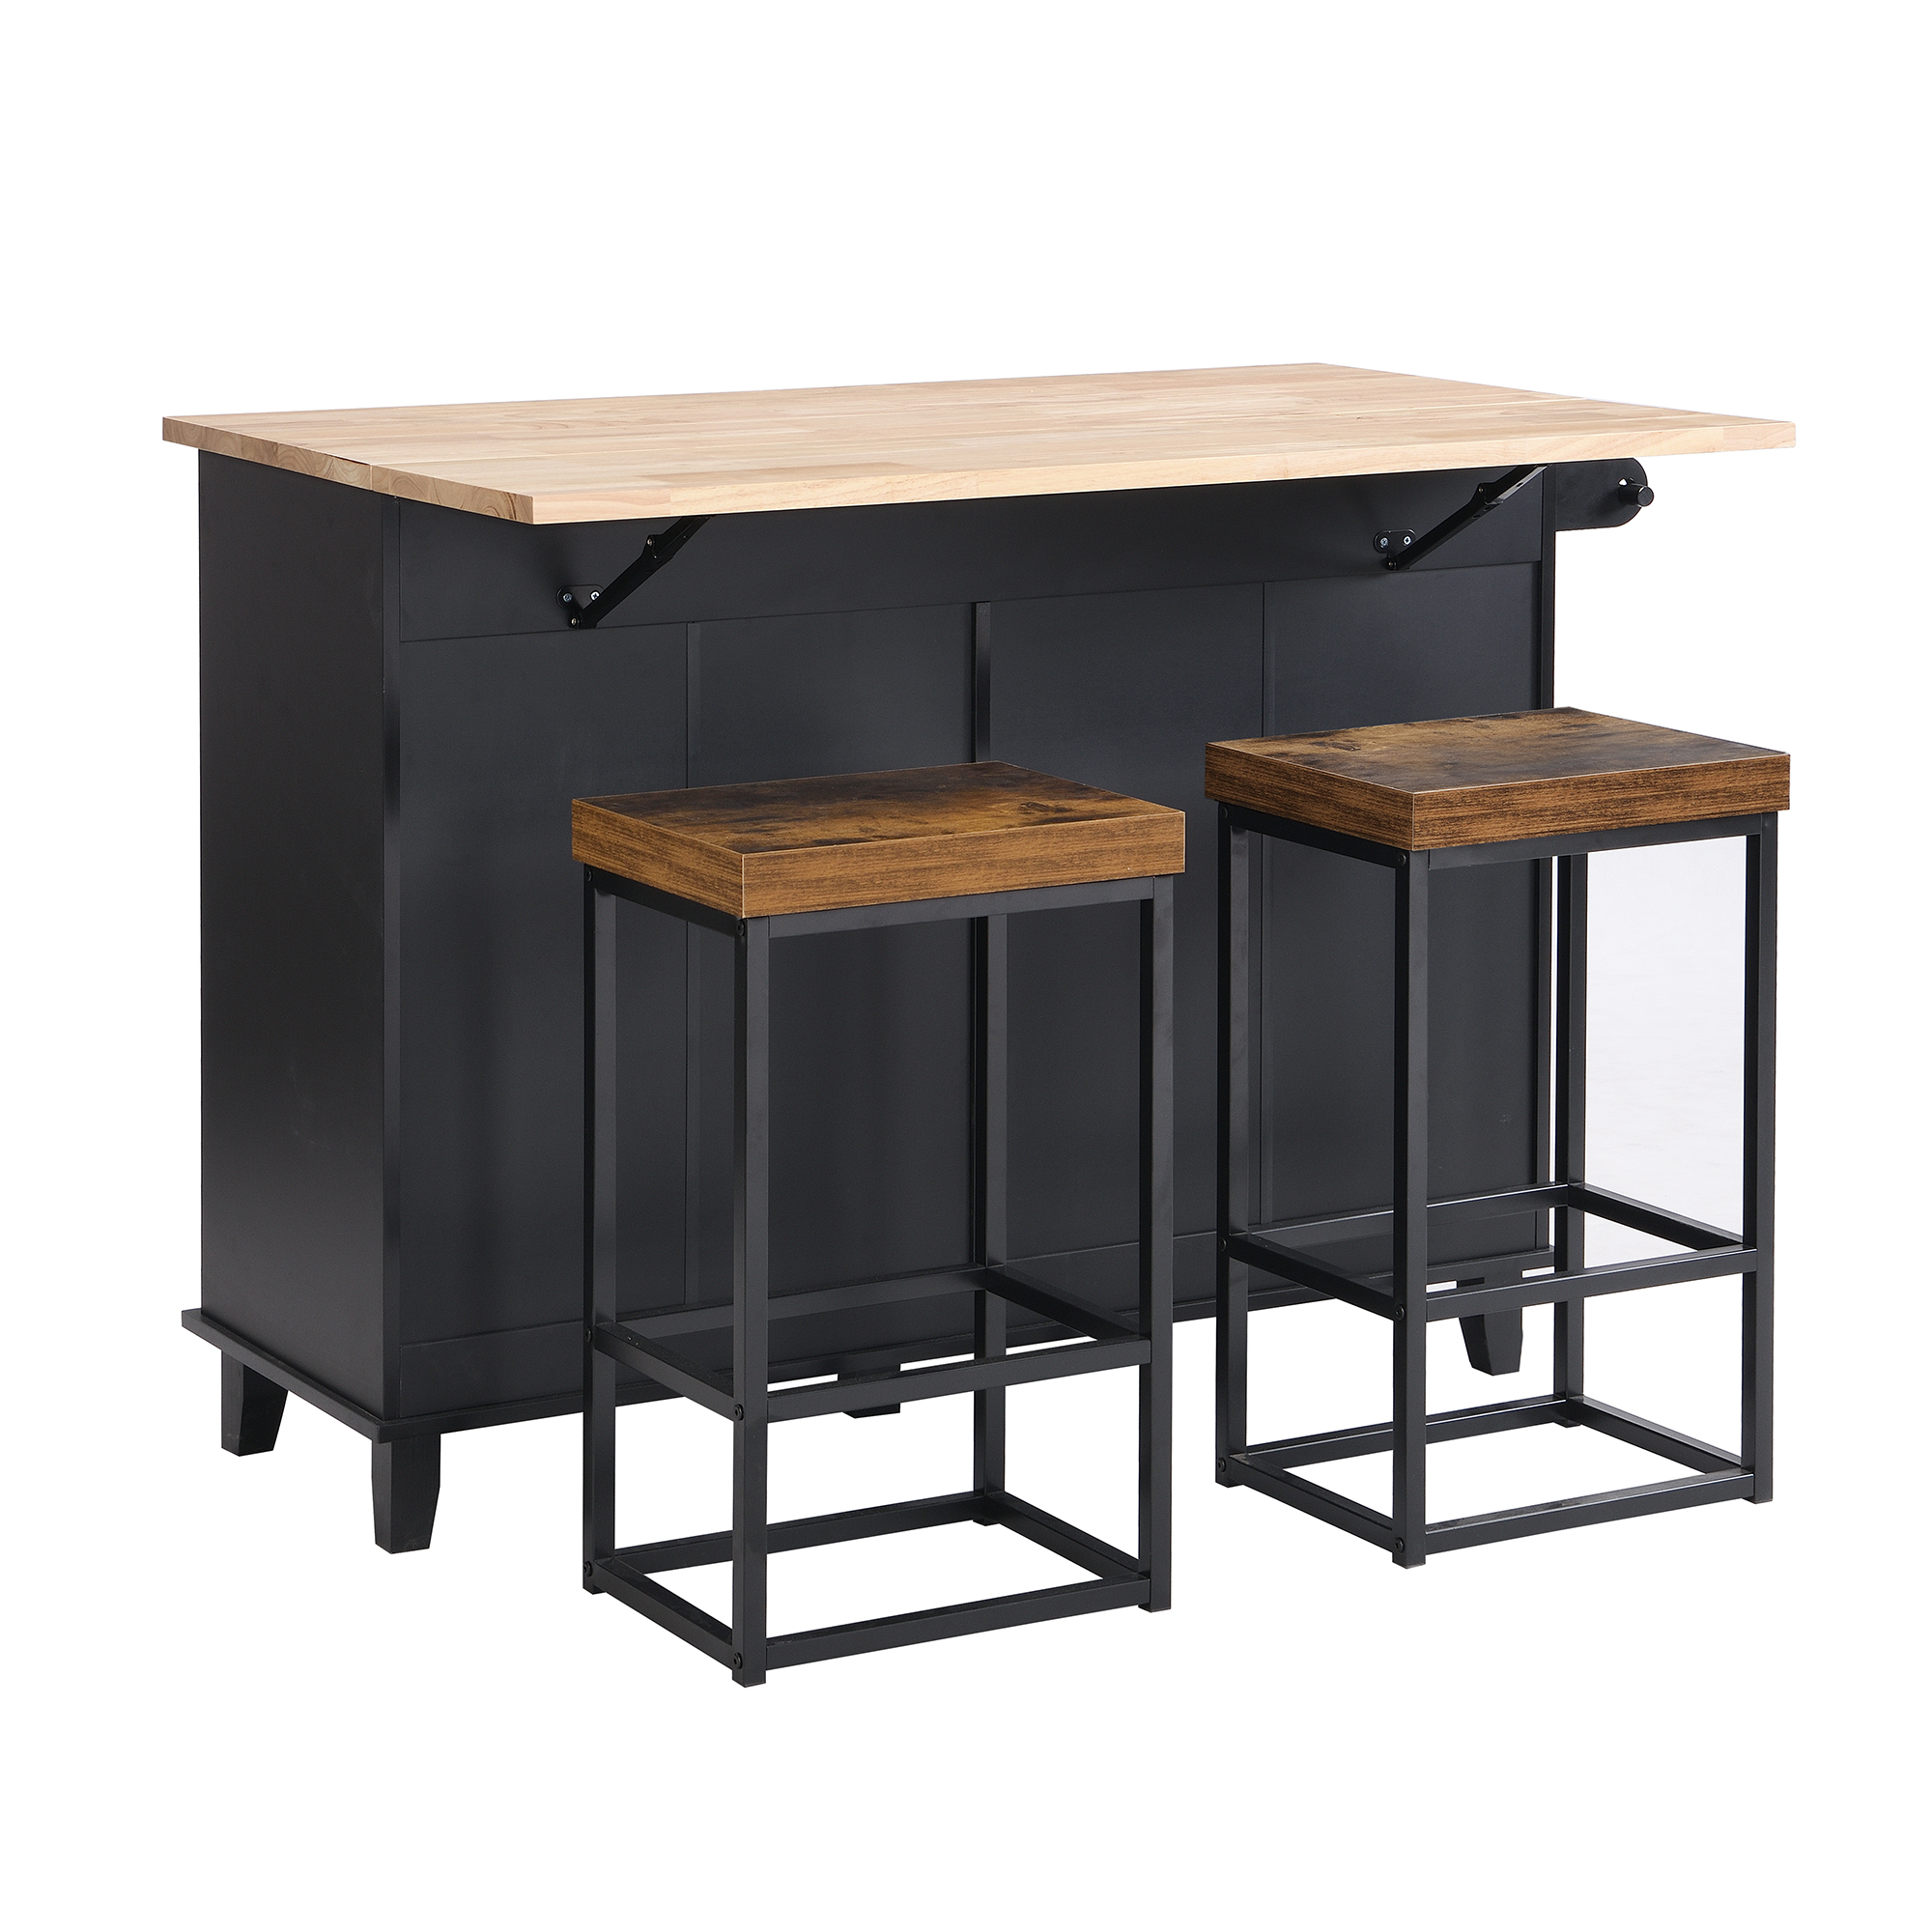 Farmhouse Counter Height Drop Leaf Kitchen Island Set with Stools - SH000234AAB